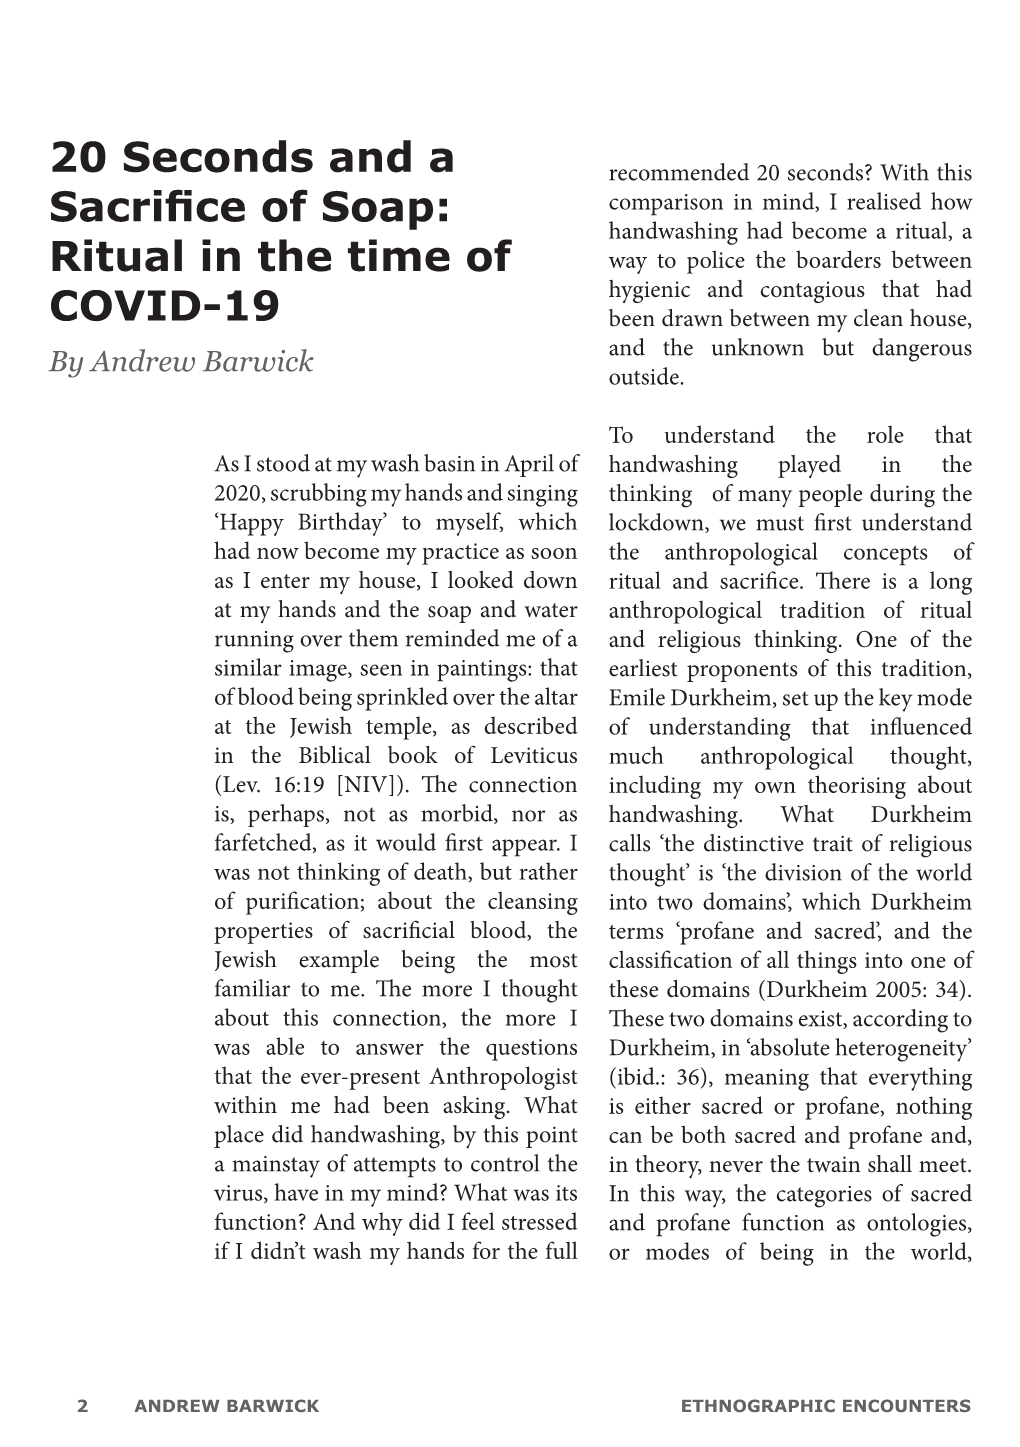 20 Seconds and a Sacrifice of Soap: Ritual in the Time of COVID-19